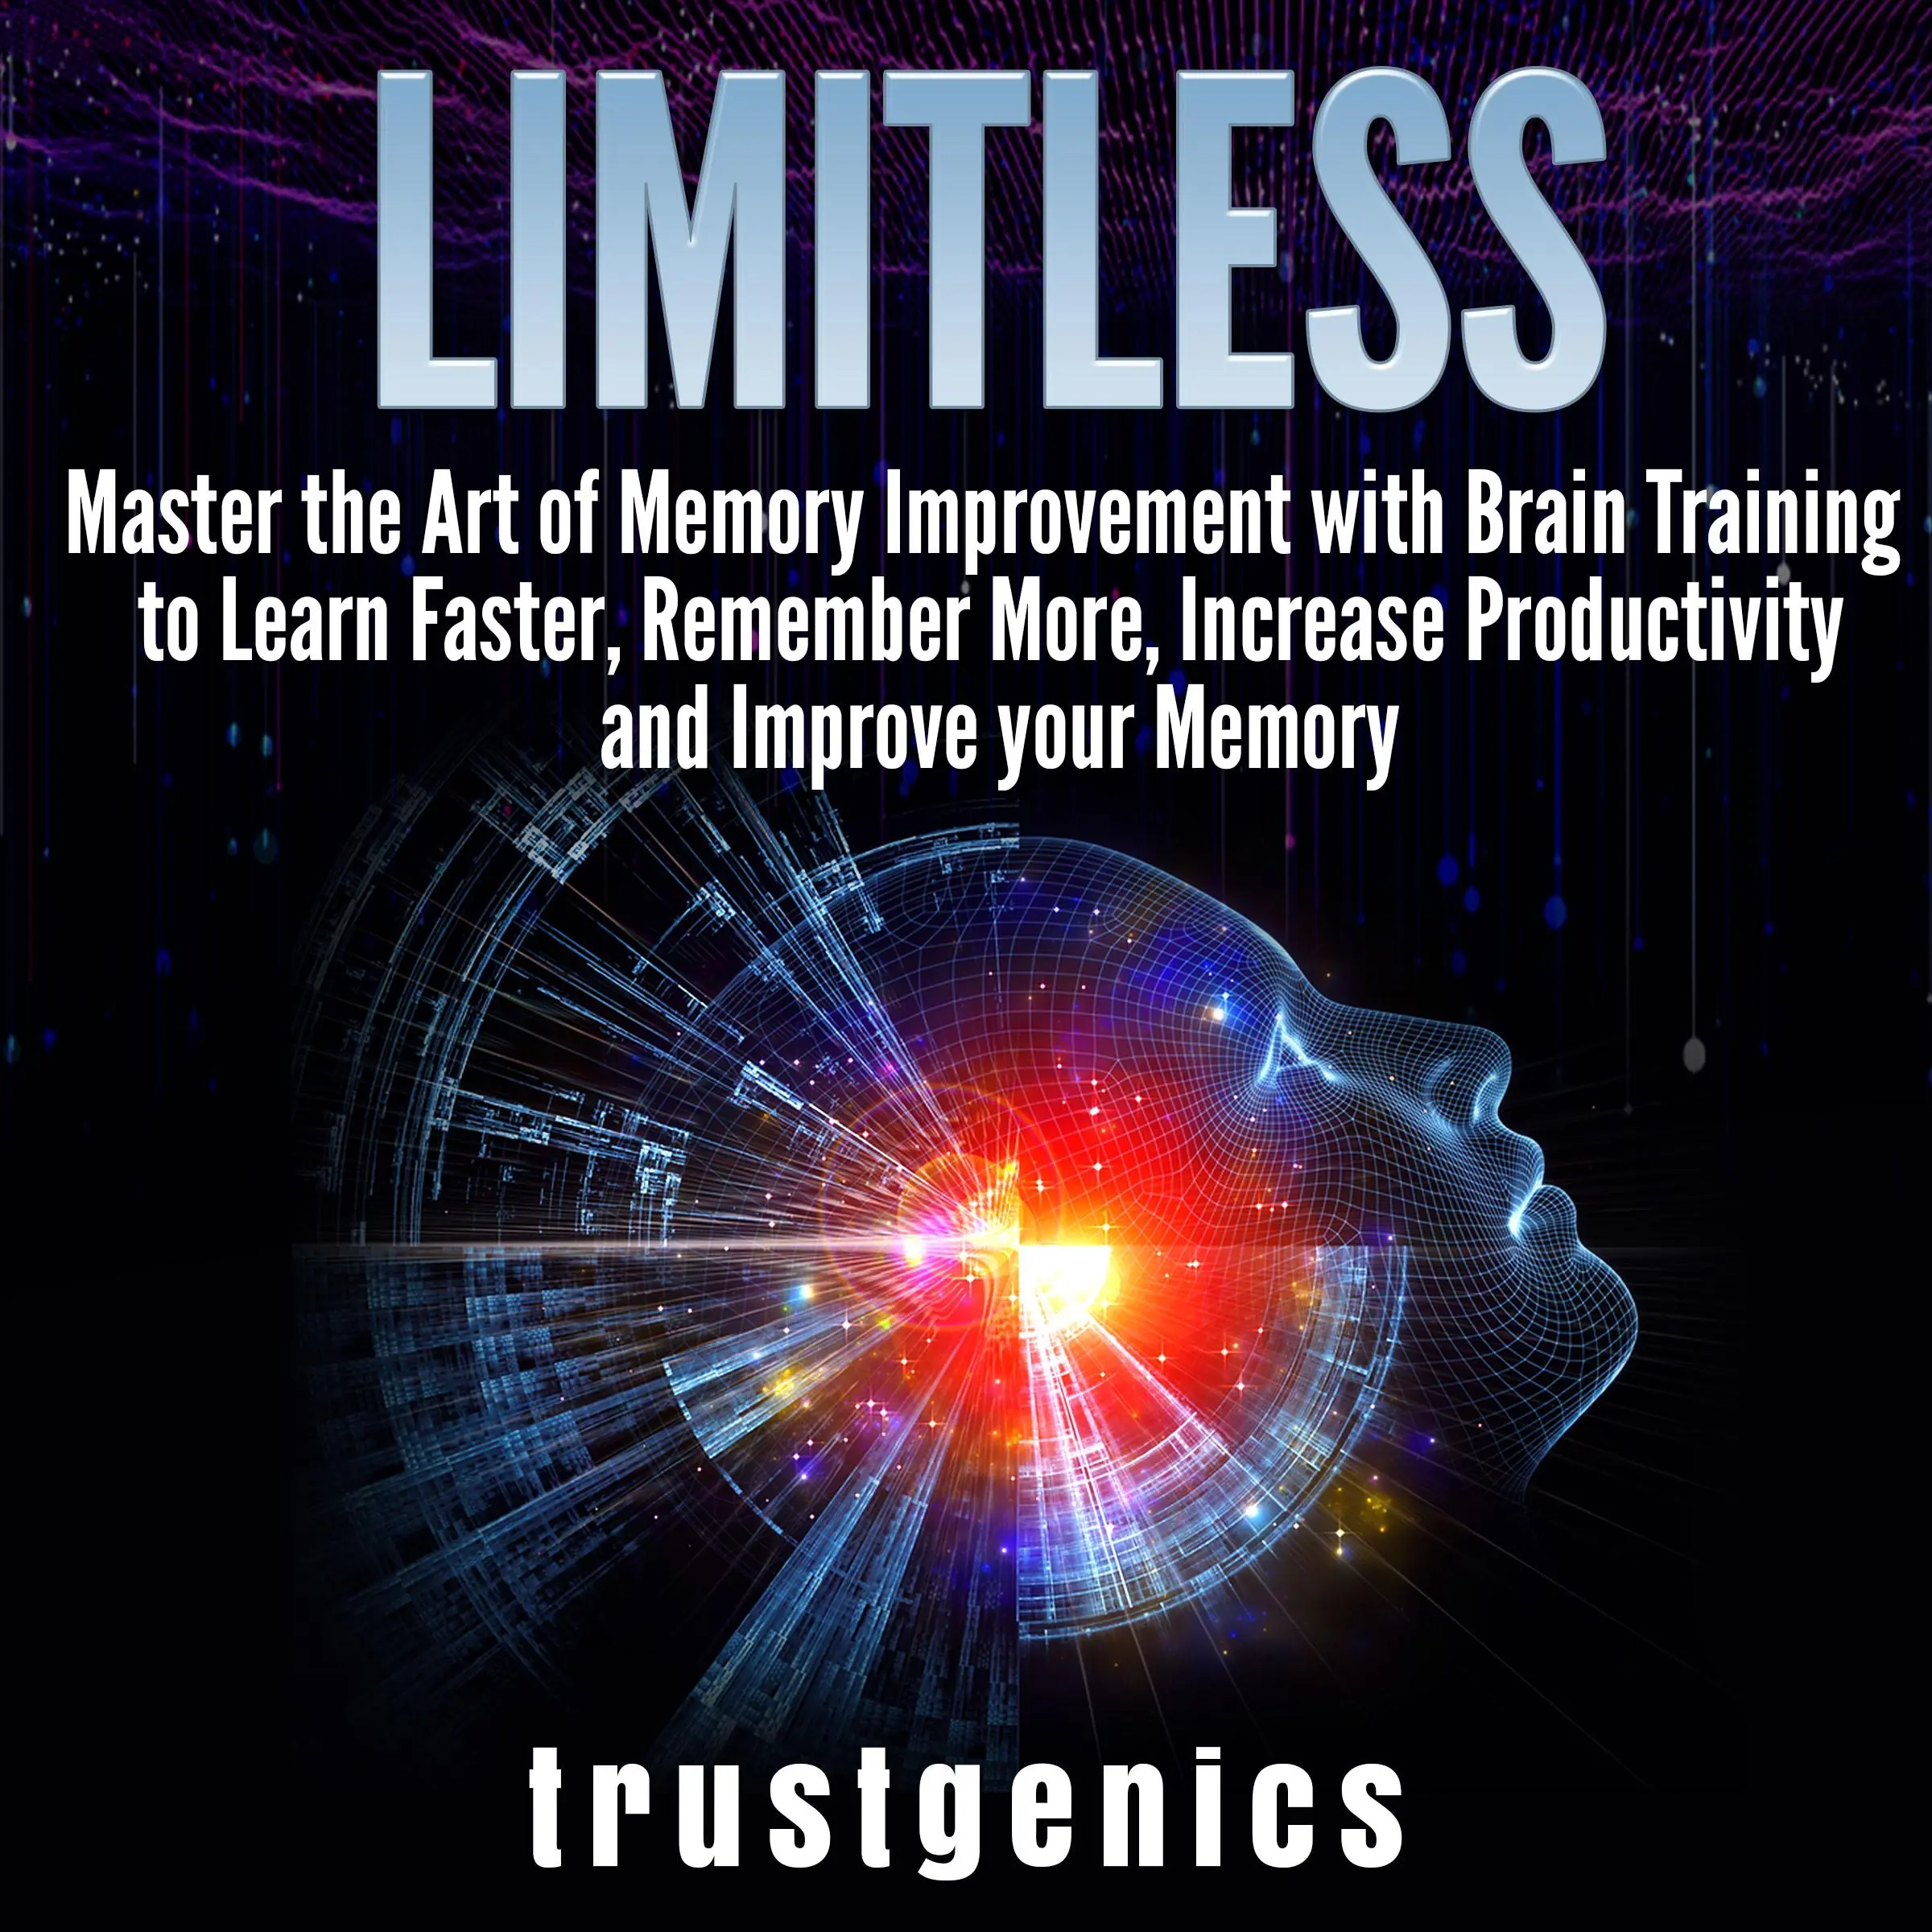 Limitless Audiobook by Trust Genics